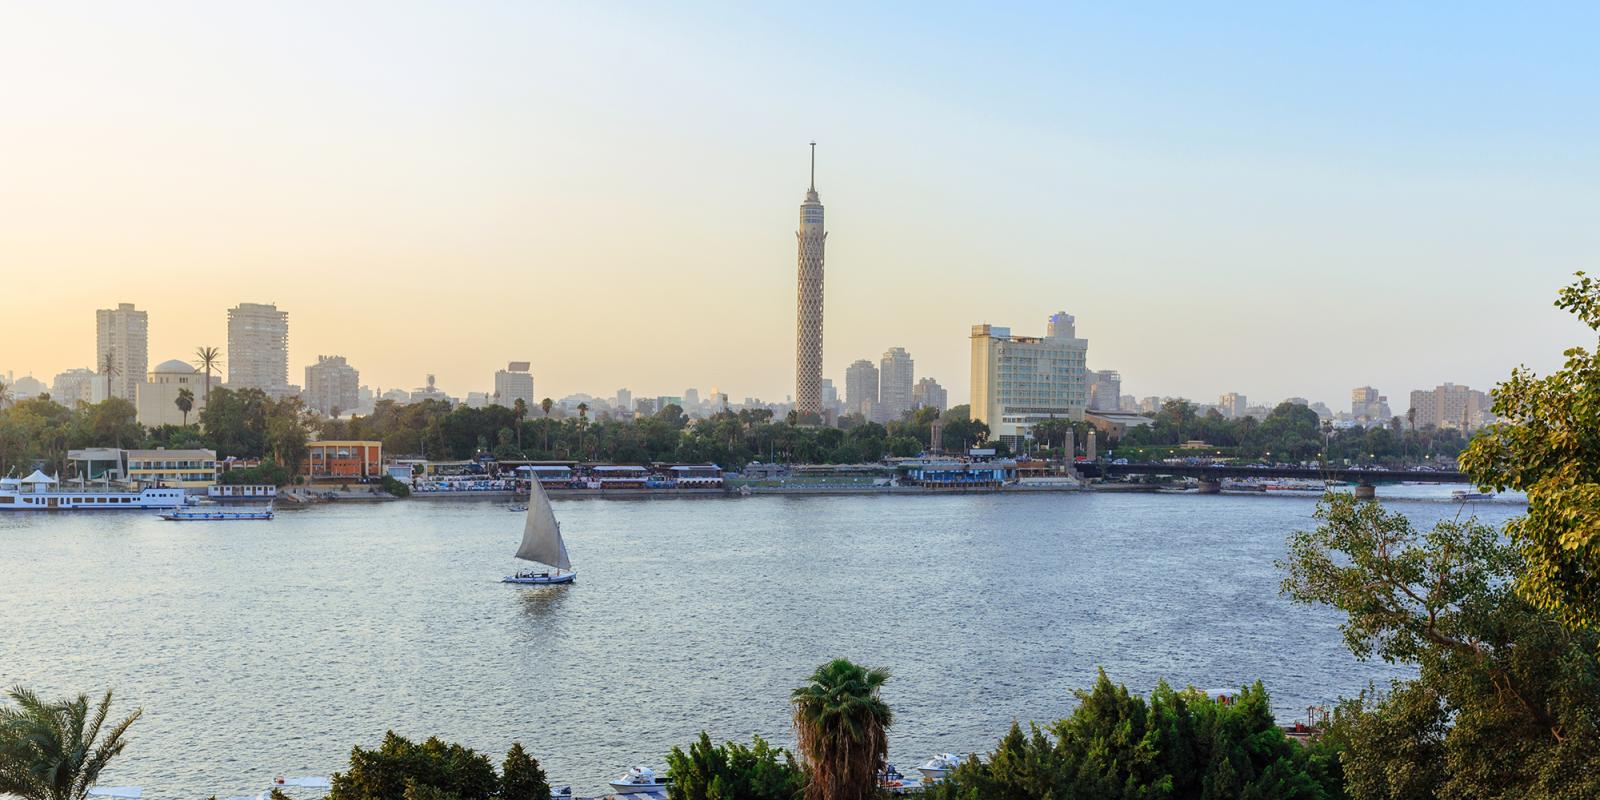 Nile River and Cairo Tower in the background. 